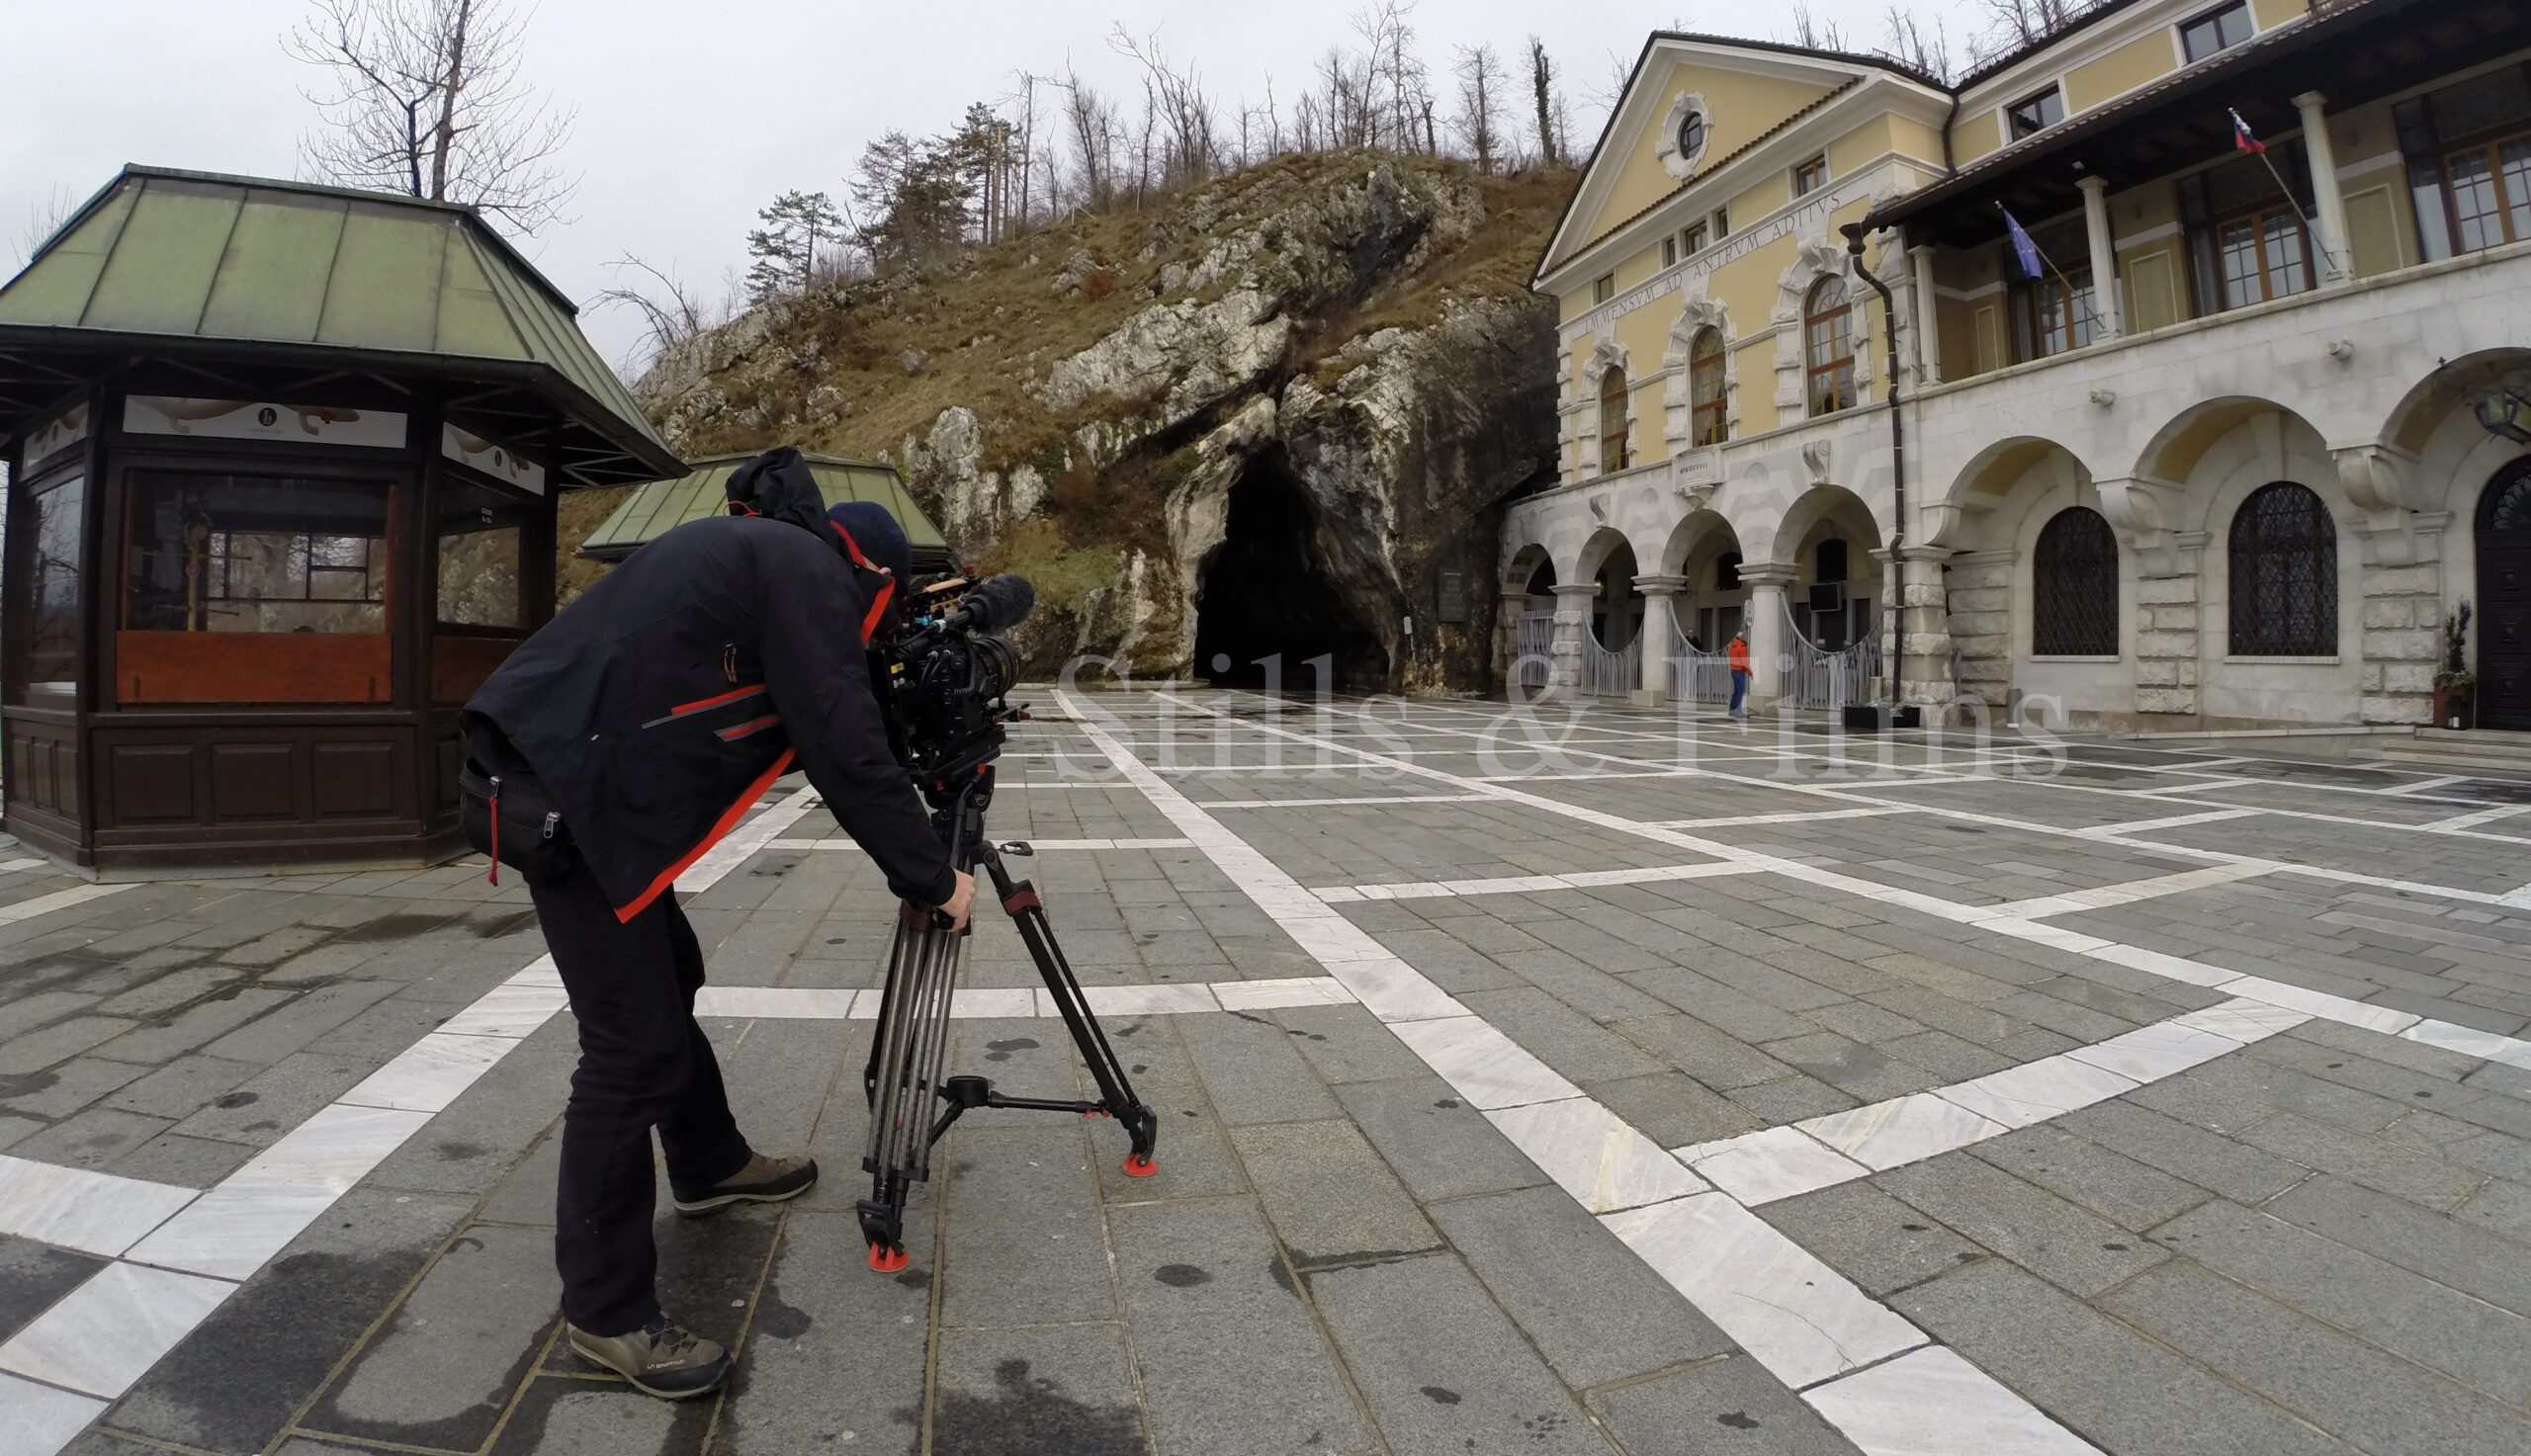 We were filming at the Postojna cave for Discovery channel.